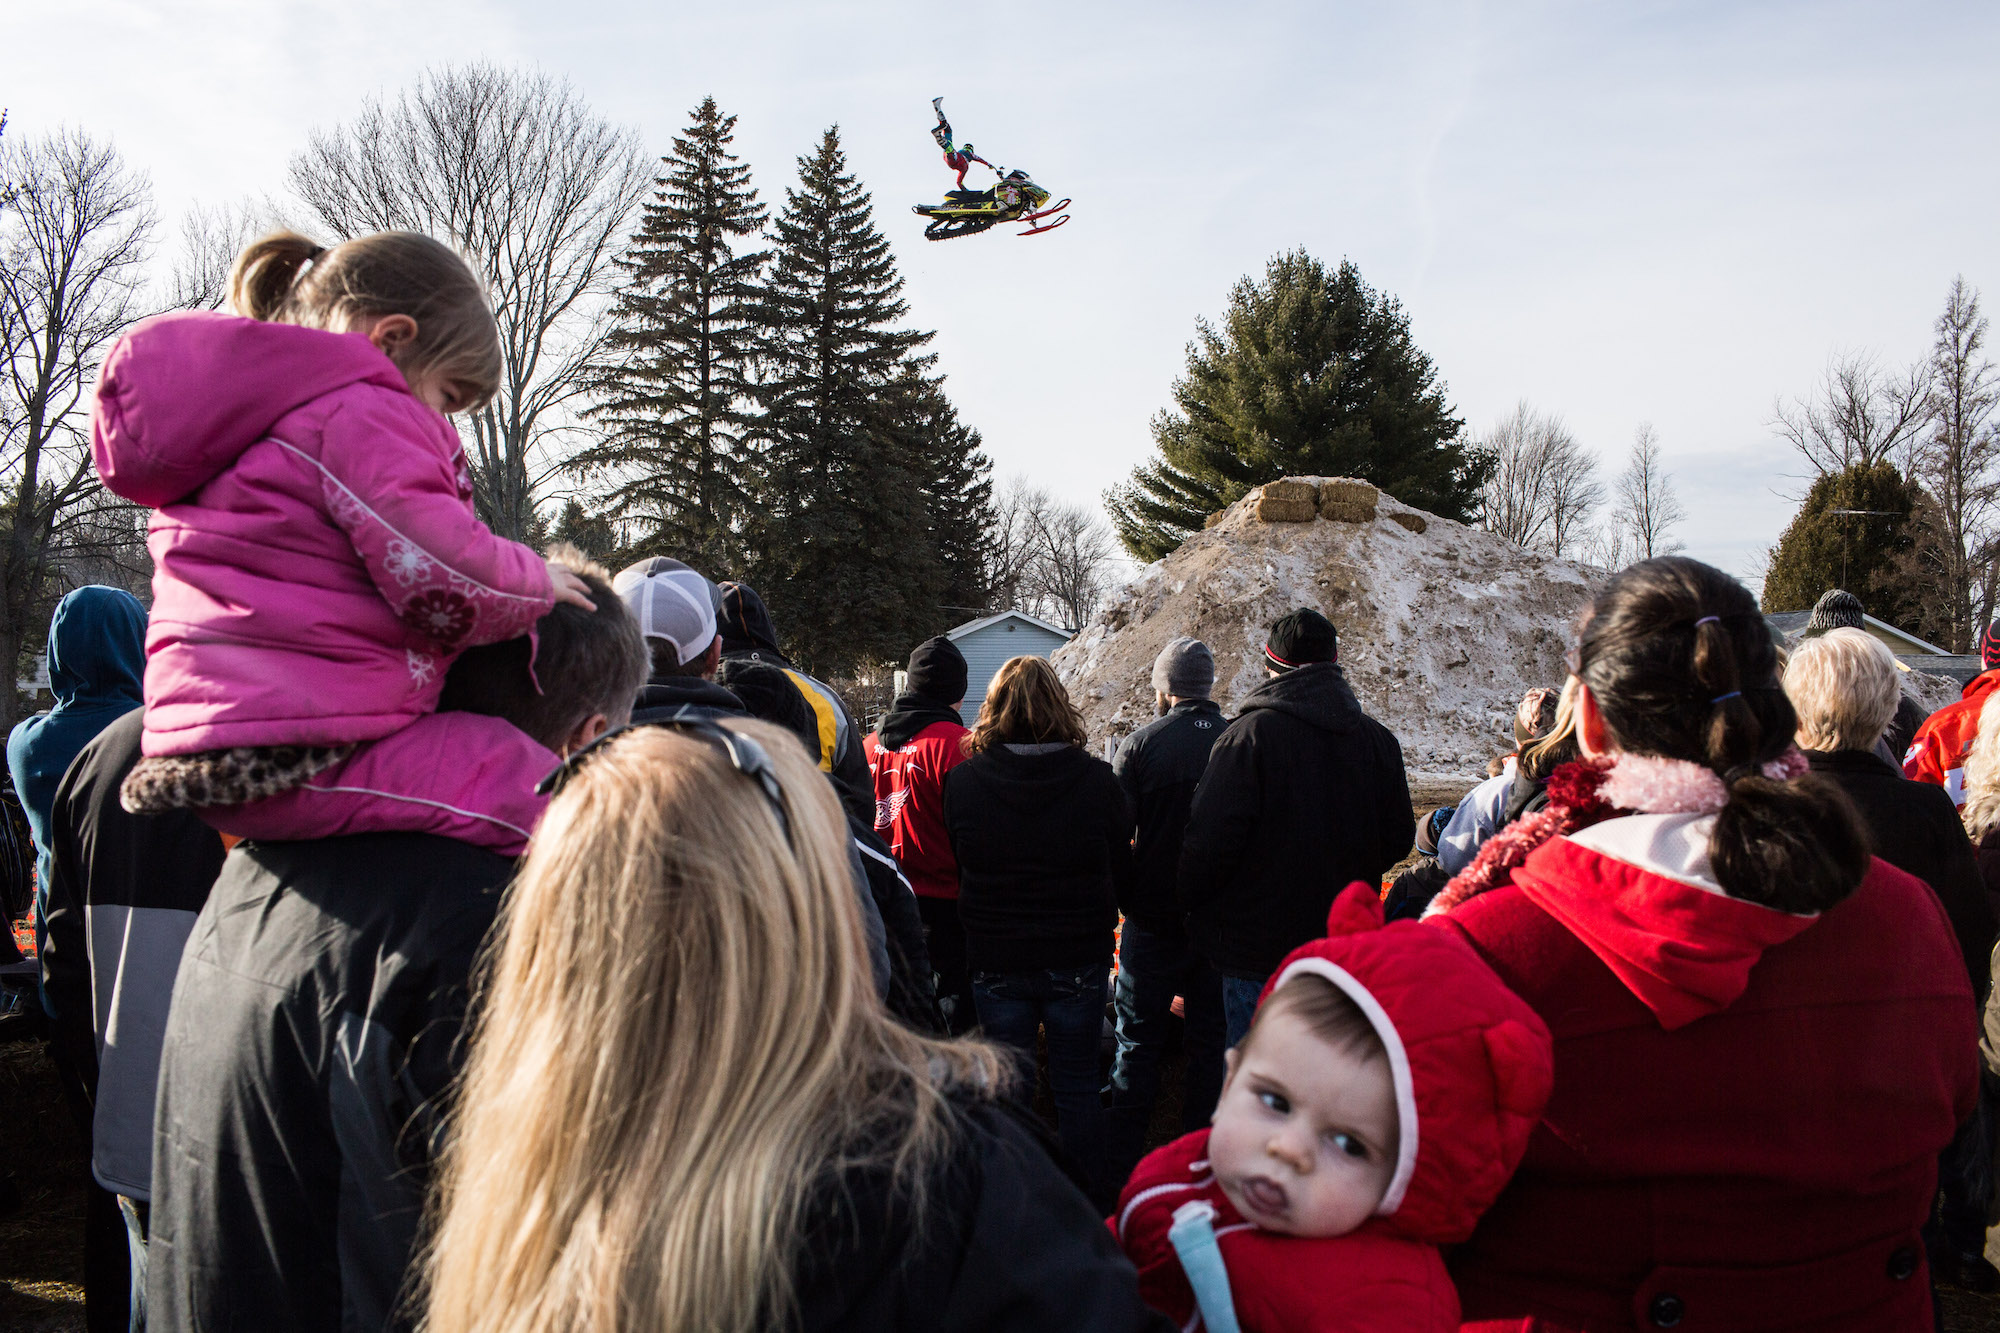 a snowmobile and rider fly through the air above a crowd of onlookers including small children in bright quilted jackets